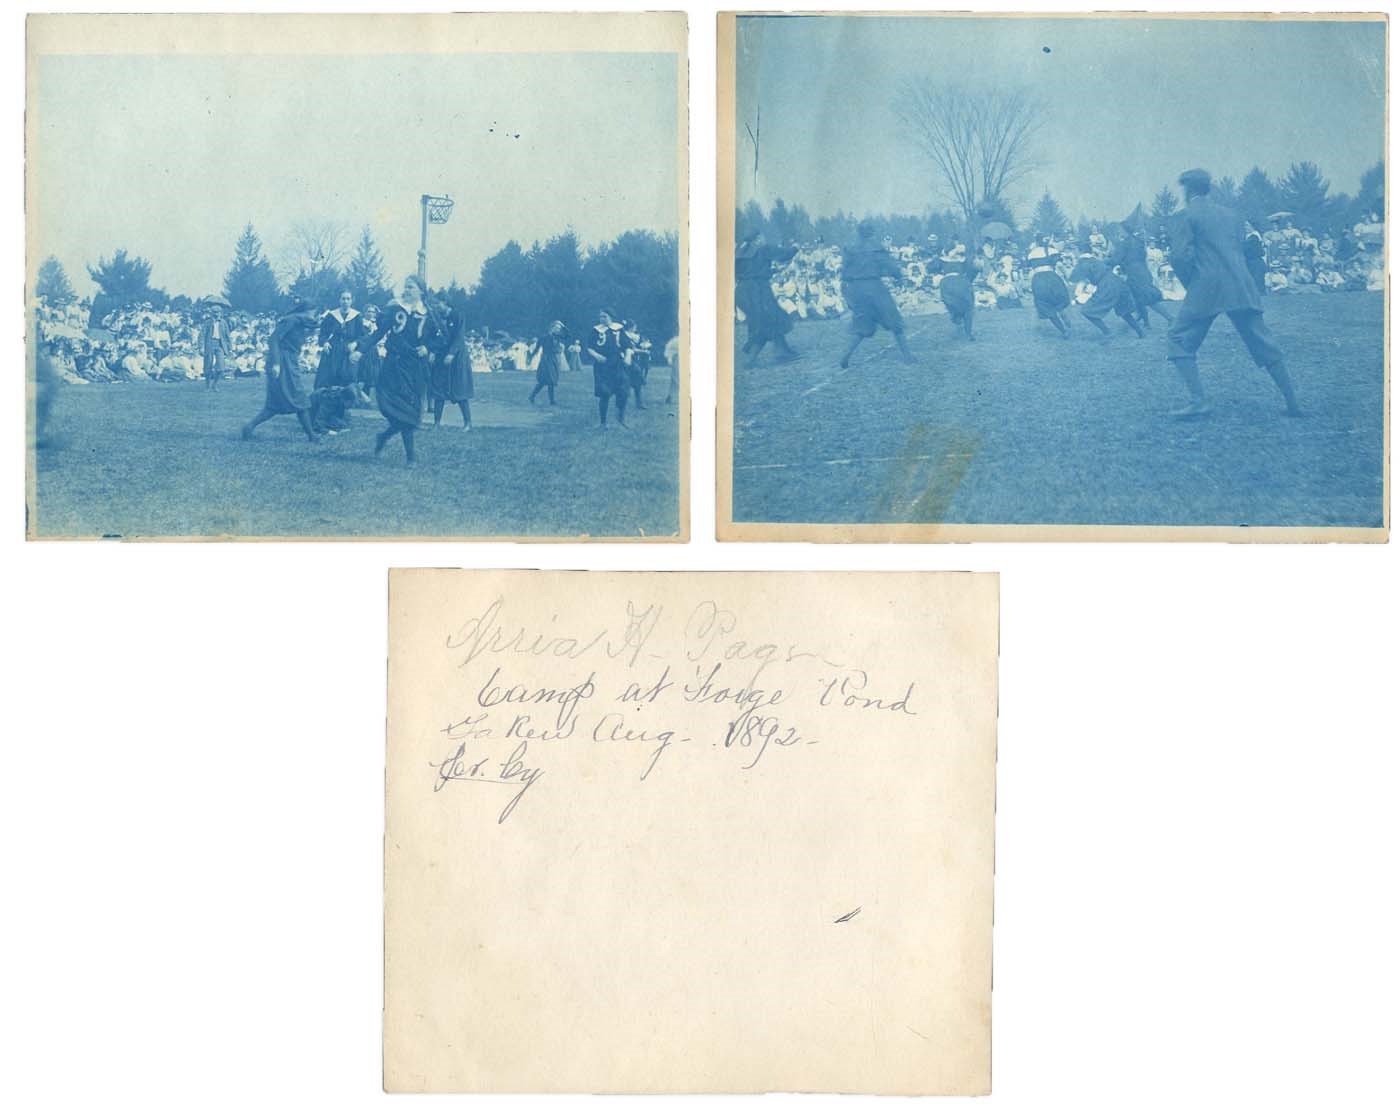 - 1892 Basketball Game Cyanotype Photographs - 2nd Year of the Game's Existence